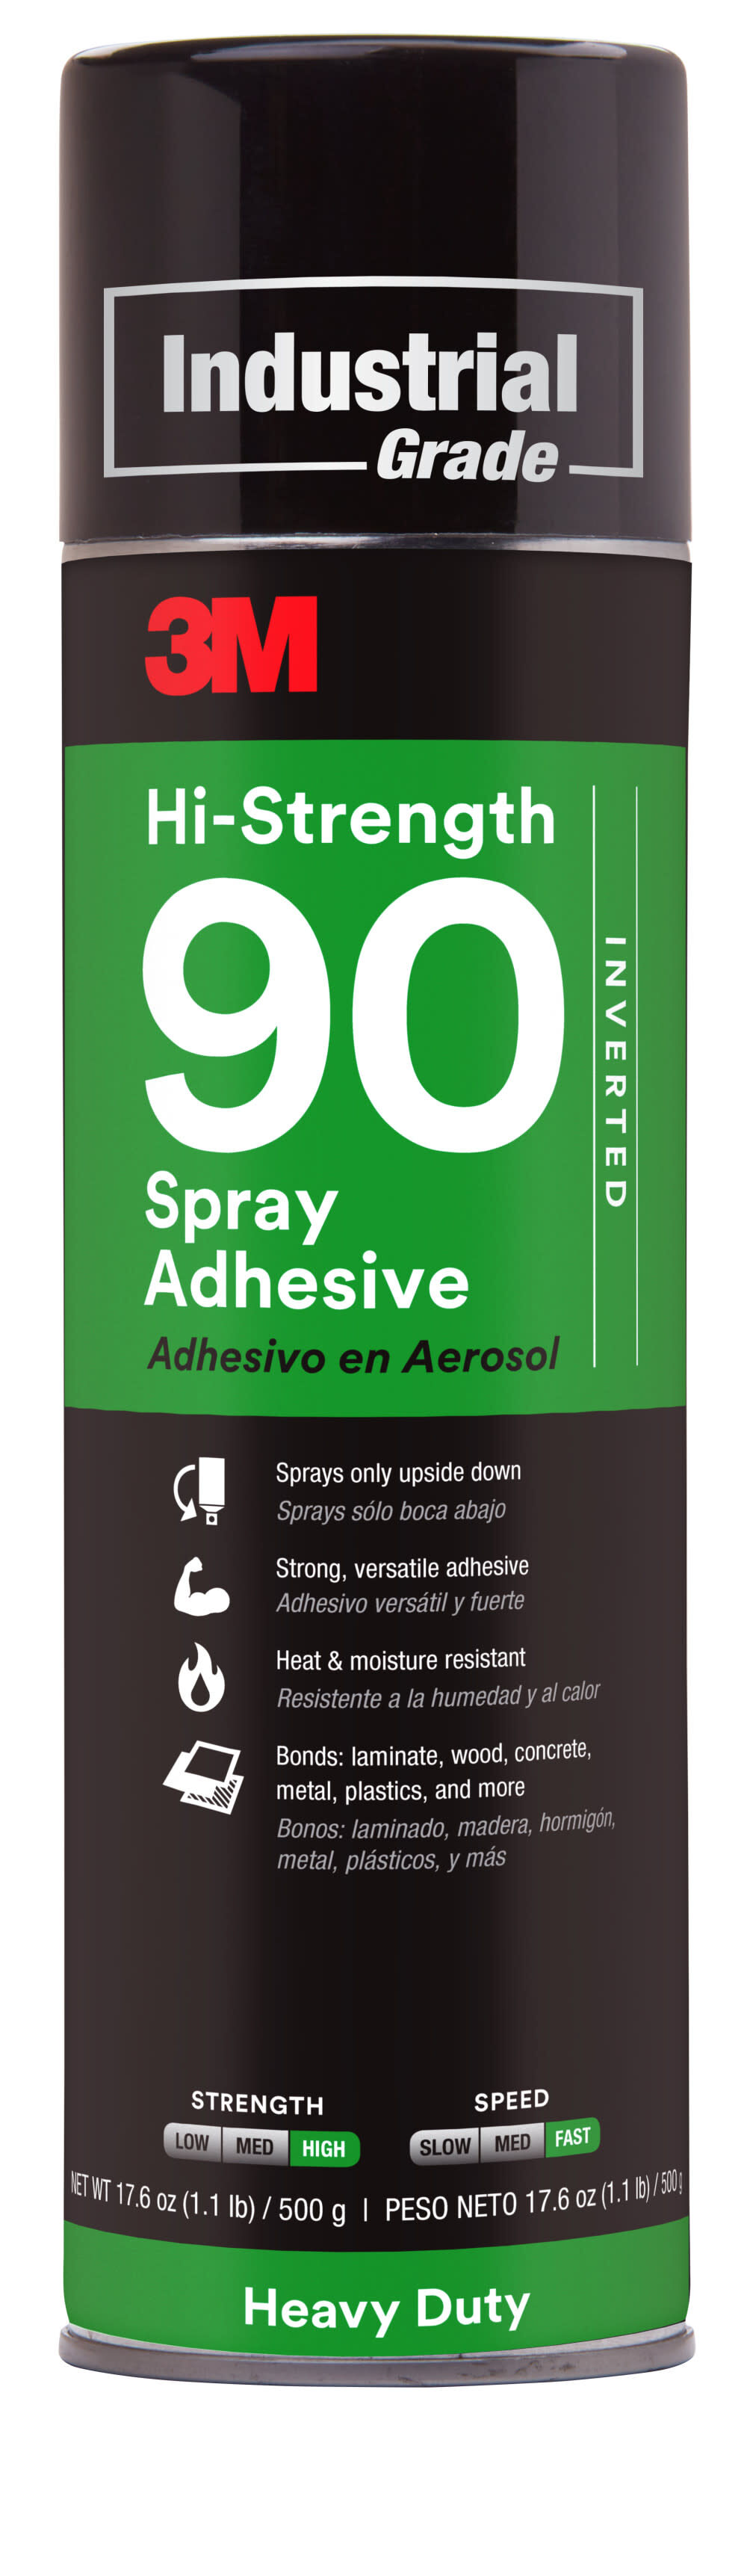 3M 24 Spray Adhesive for Foam and Fabric Bonding